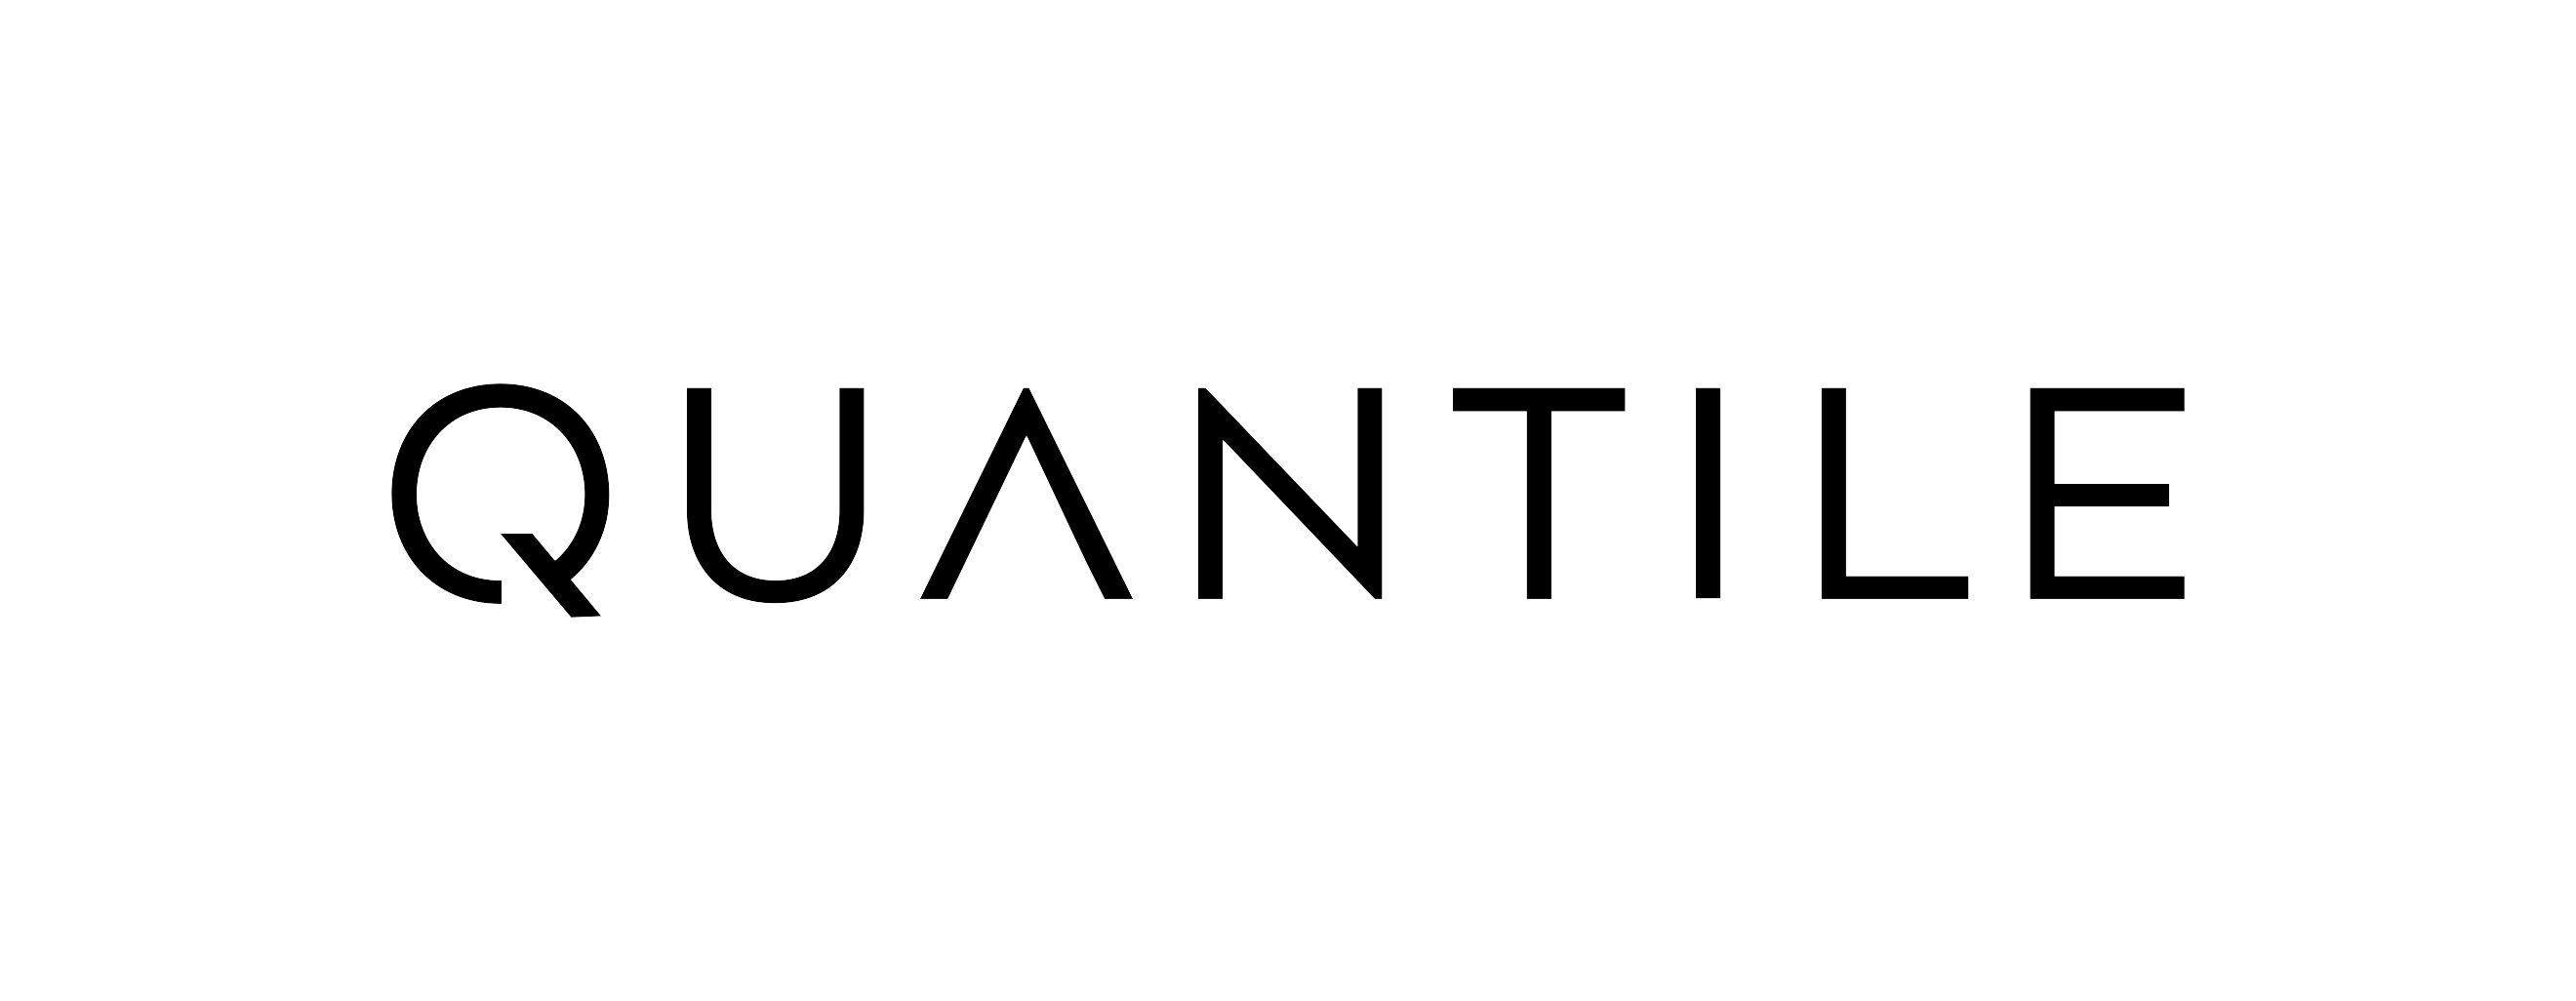 Guido Van Ingen Joins Quantile as Managing Director of the Netherlands Office and Head of Relationship Management 